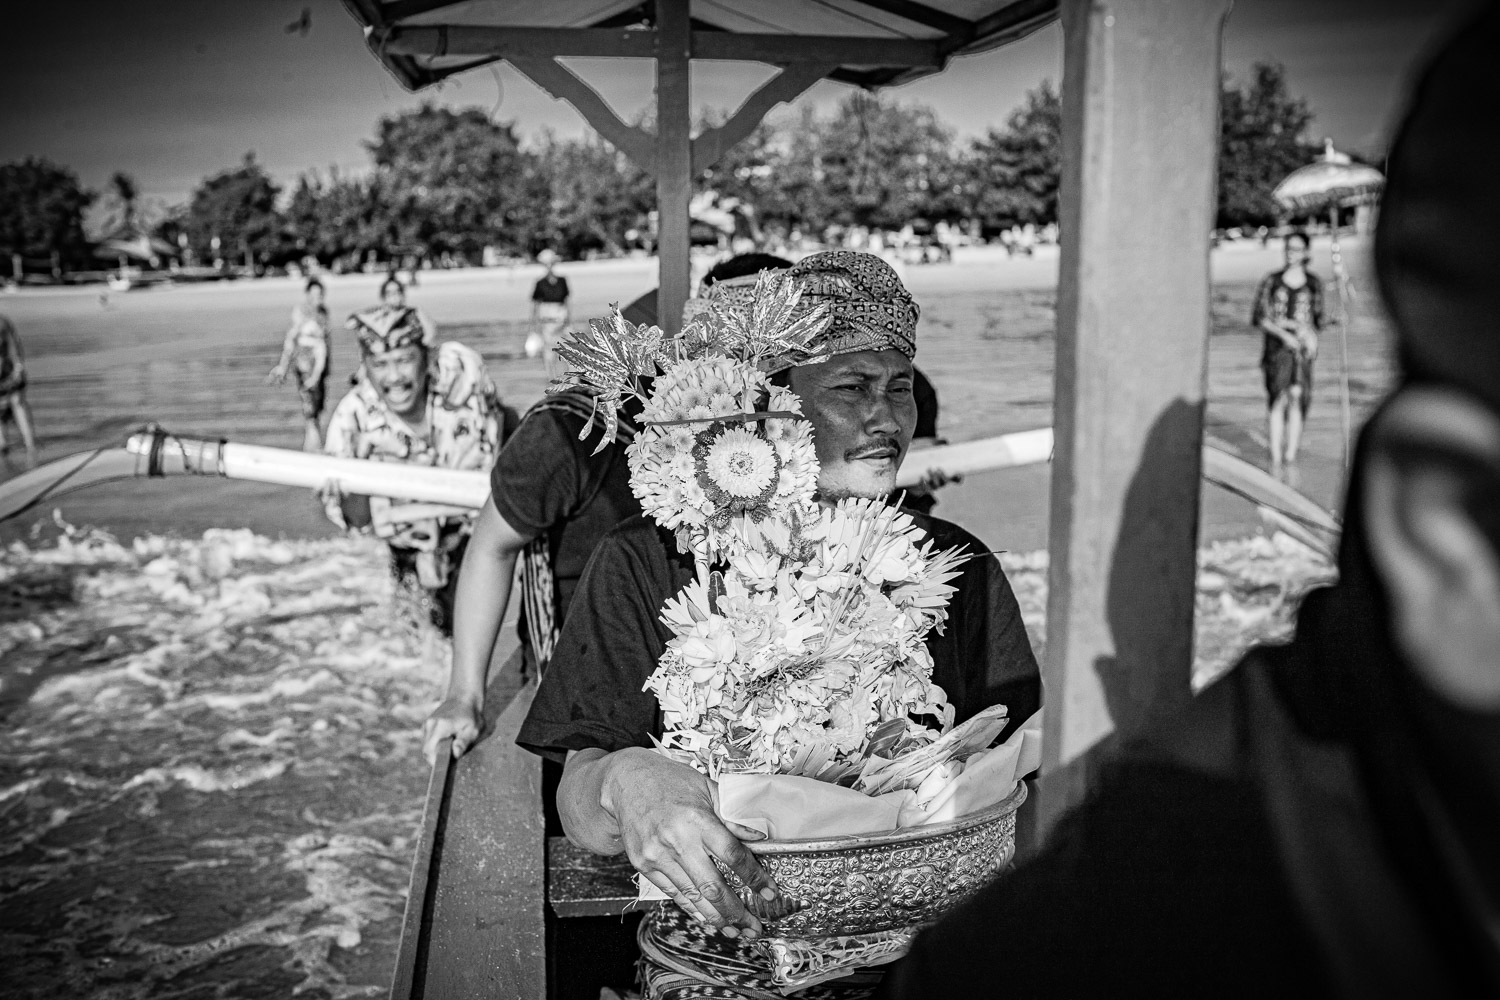 Ngaben cremation in Bali, the 5 elements of the body have been returned to the macrocosm whence they came.